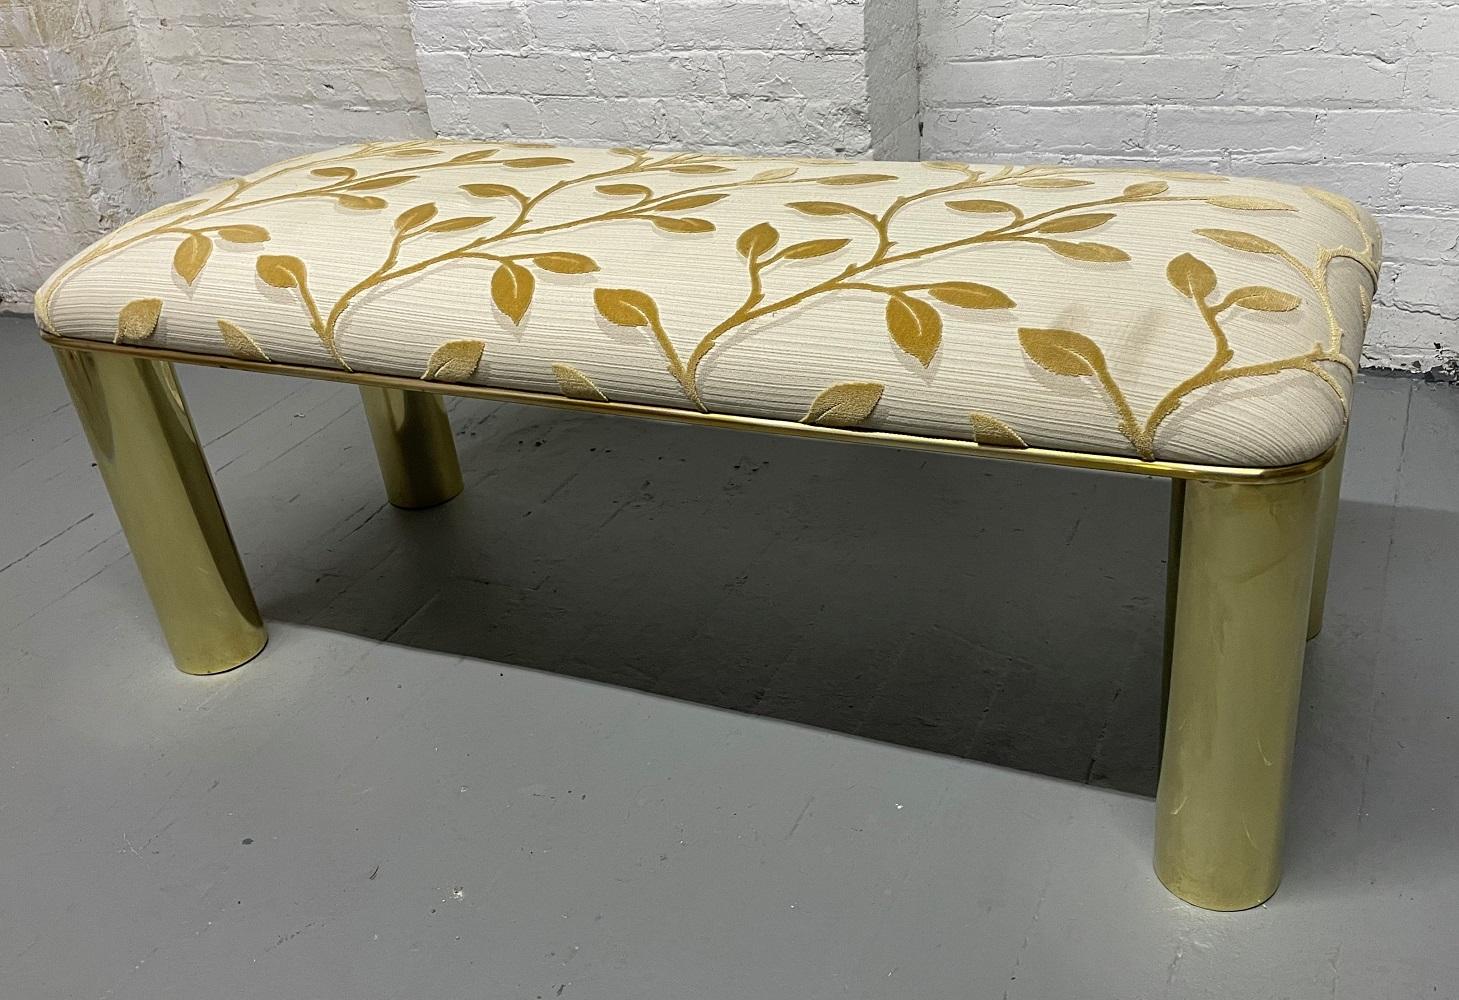 Karl Springer brass and upholstered bench. The bench has brass cylindrical legs with the original floral fabric.